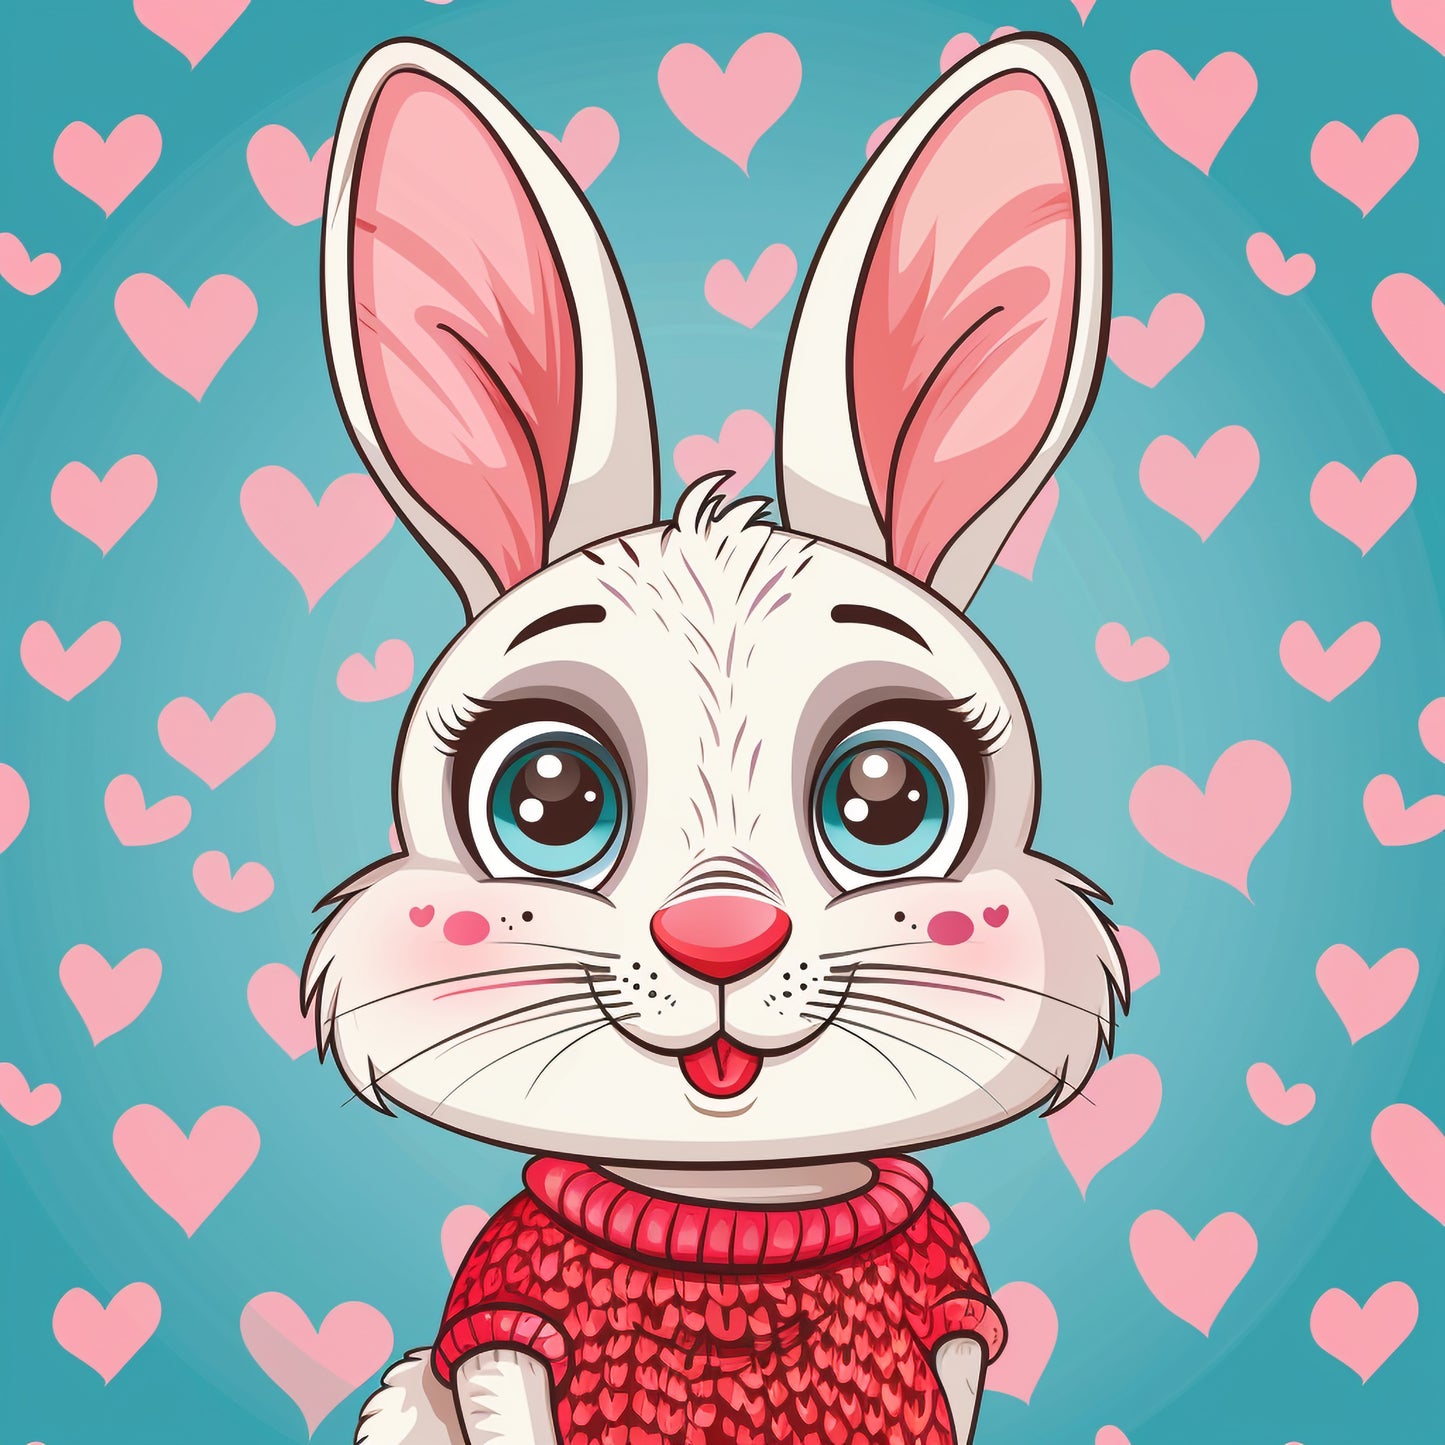 Adorable Smiling Rabbit With Red Sweater on Heart Background